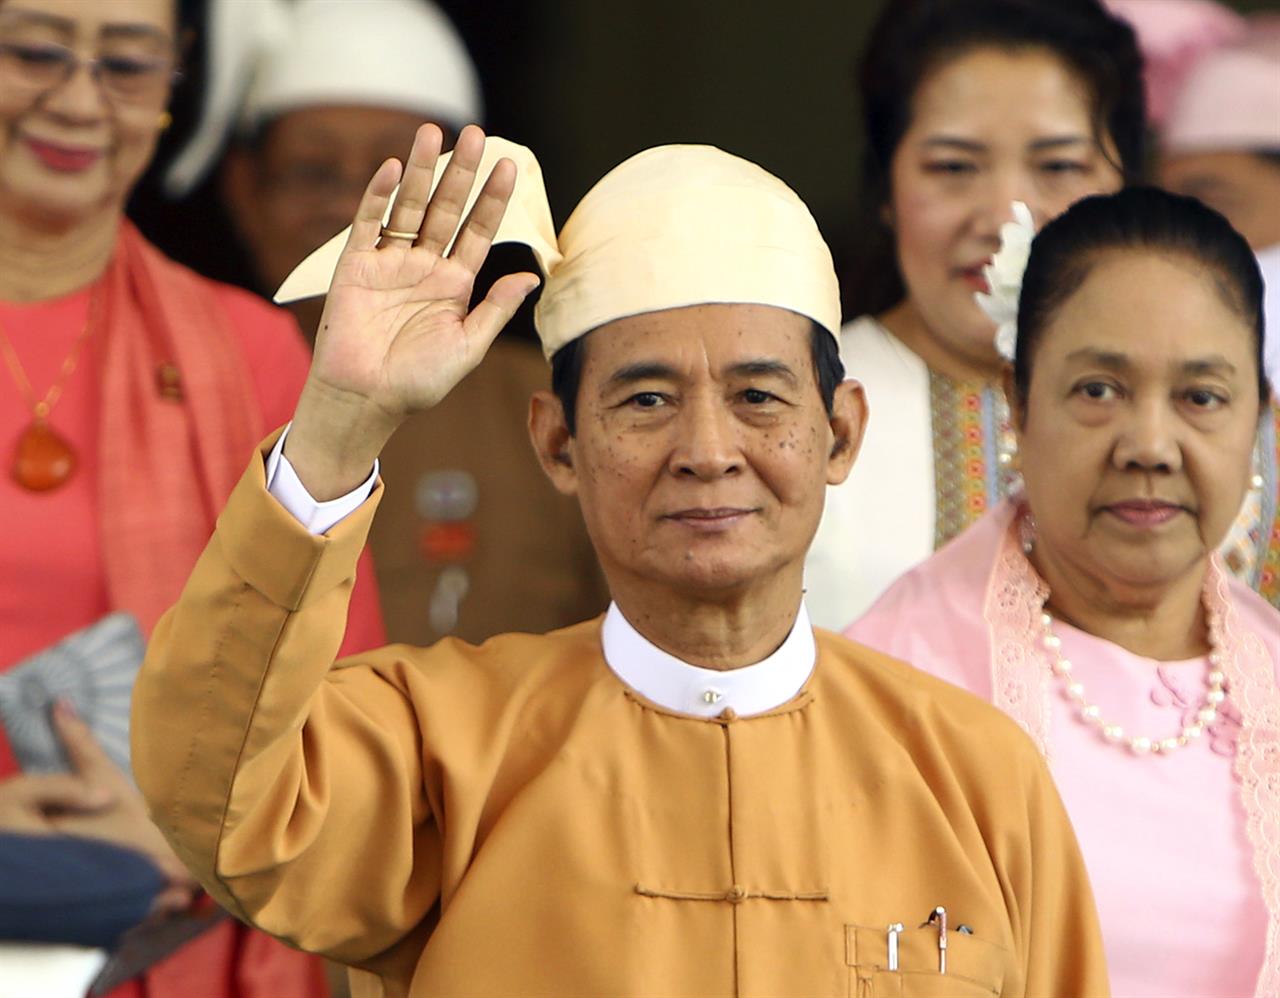 Myanmar's new President Win Myint waves to the media after taking oath of office at Parliament in Naypyitaw, Myanmar, Friday, March 30, 2018. Myanmar sworn the longtime Aung San Suu Kyi loyalist as the country's new president, who will continue his predecessor's deference to her as the nation's de facto leader. (AP Photo/Aung Shine Oo)